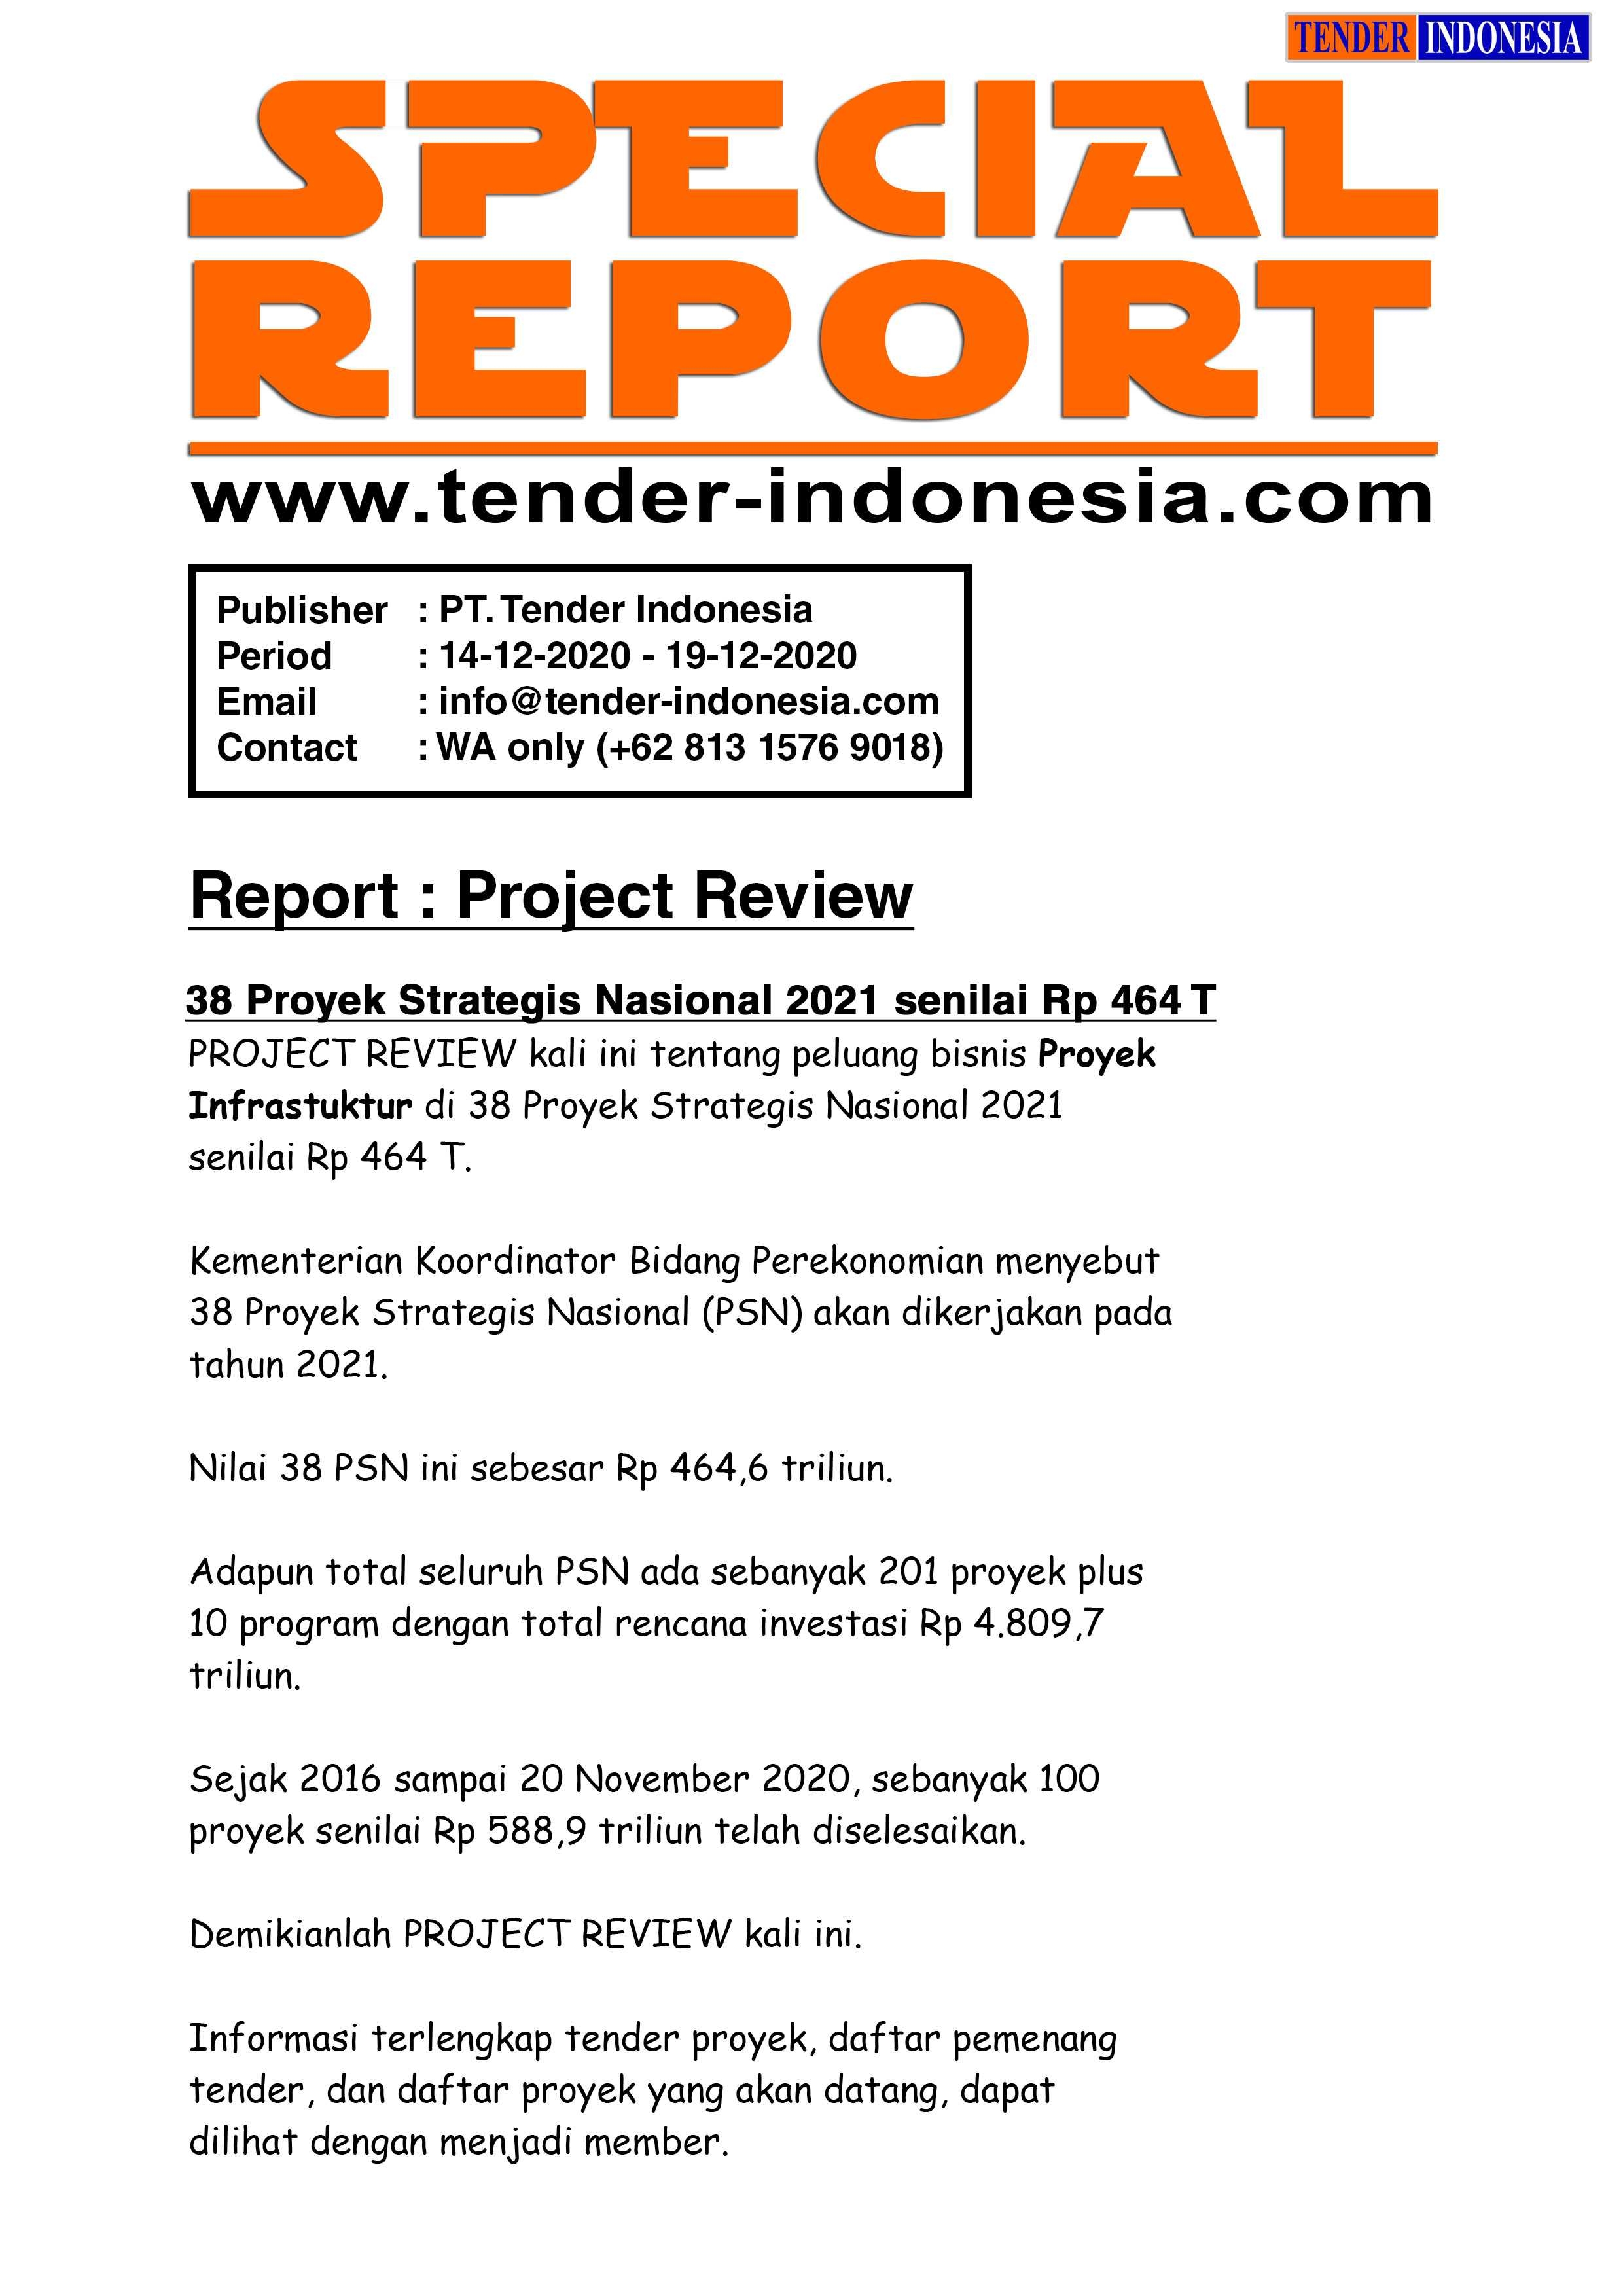 Weekly Project Review (Edisi 14 Desember - 19 Desember 2020)